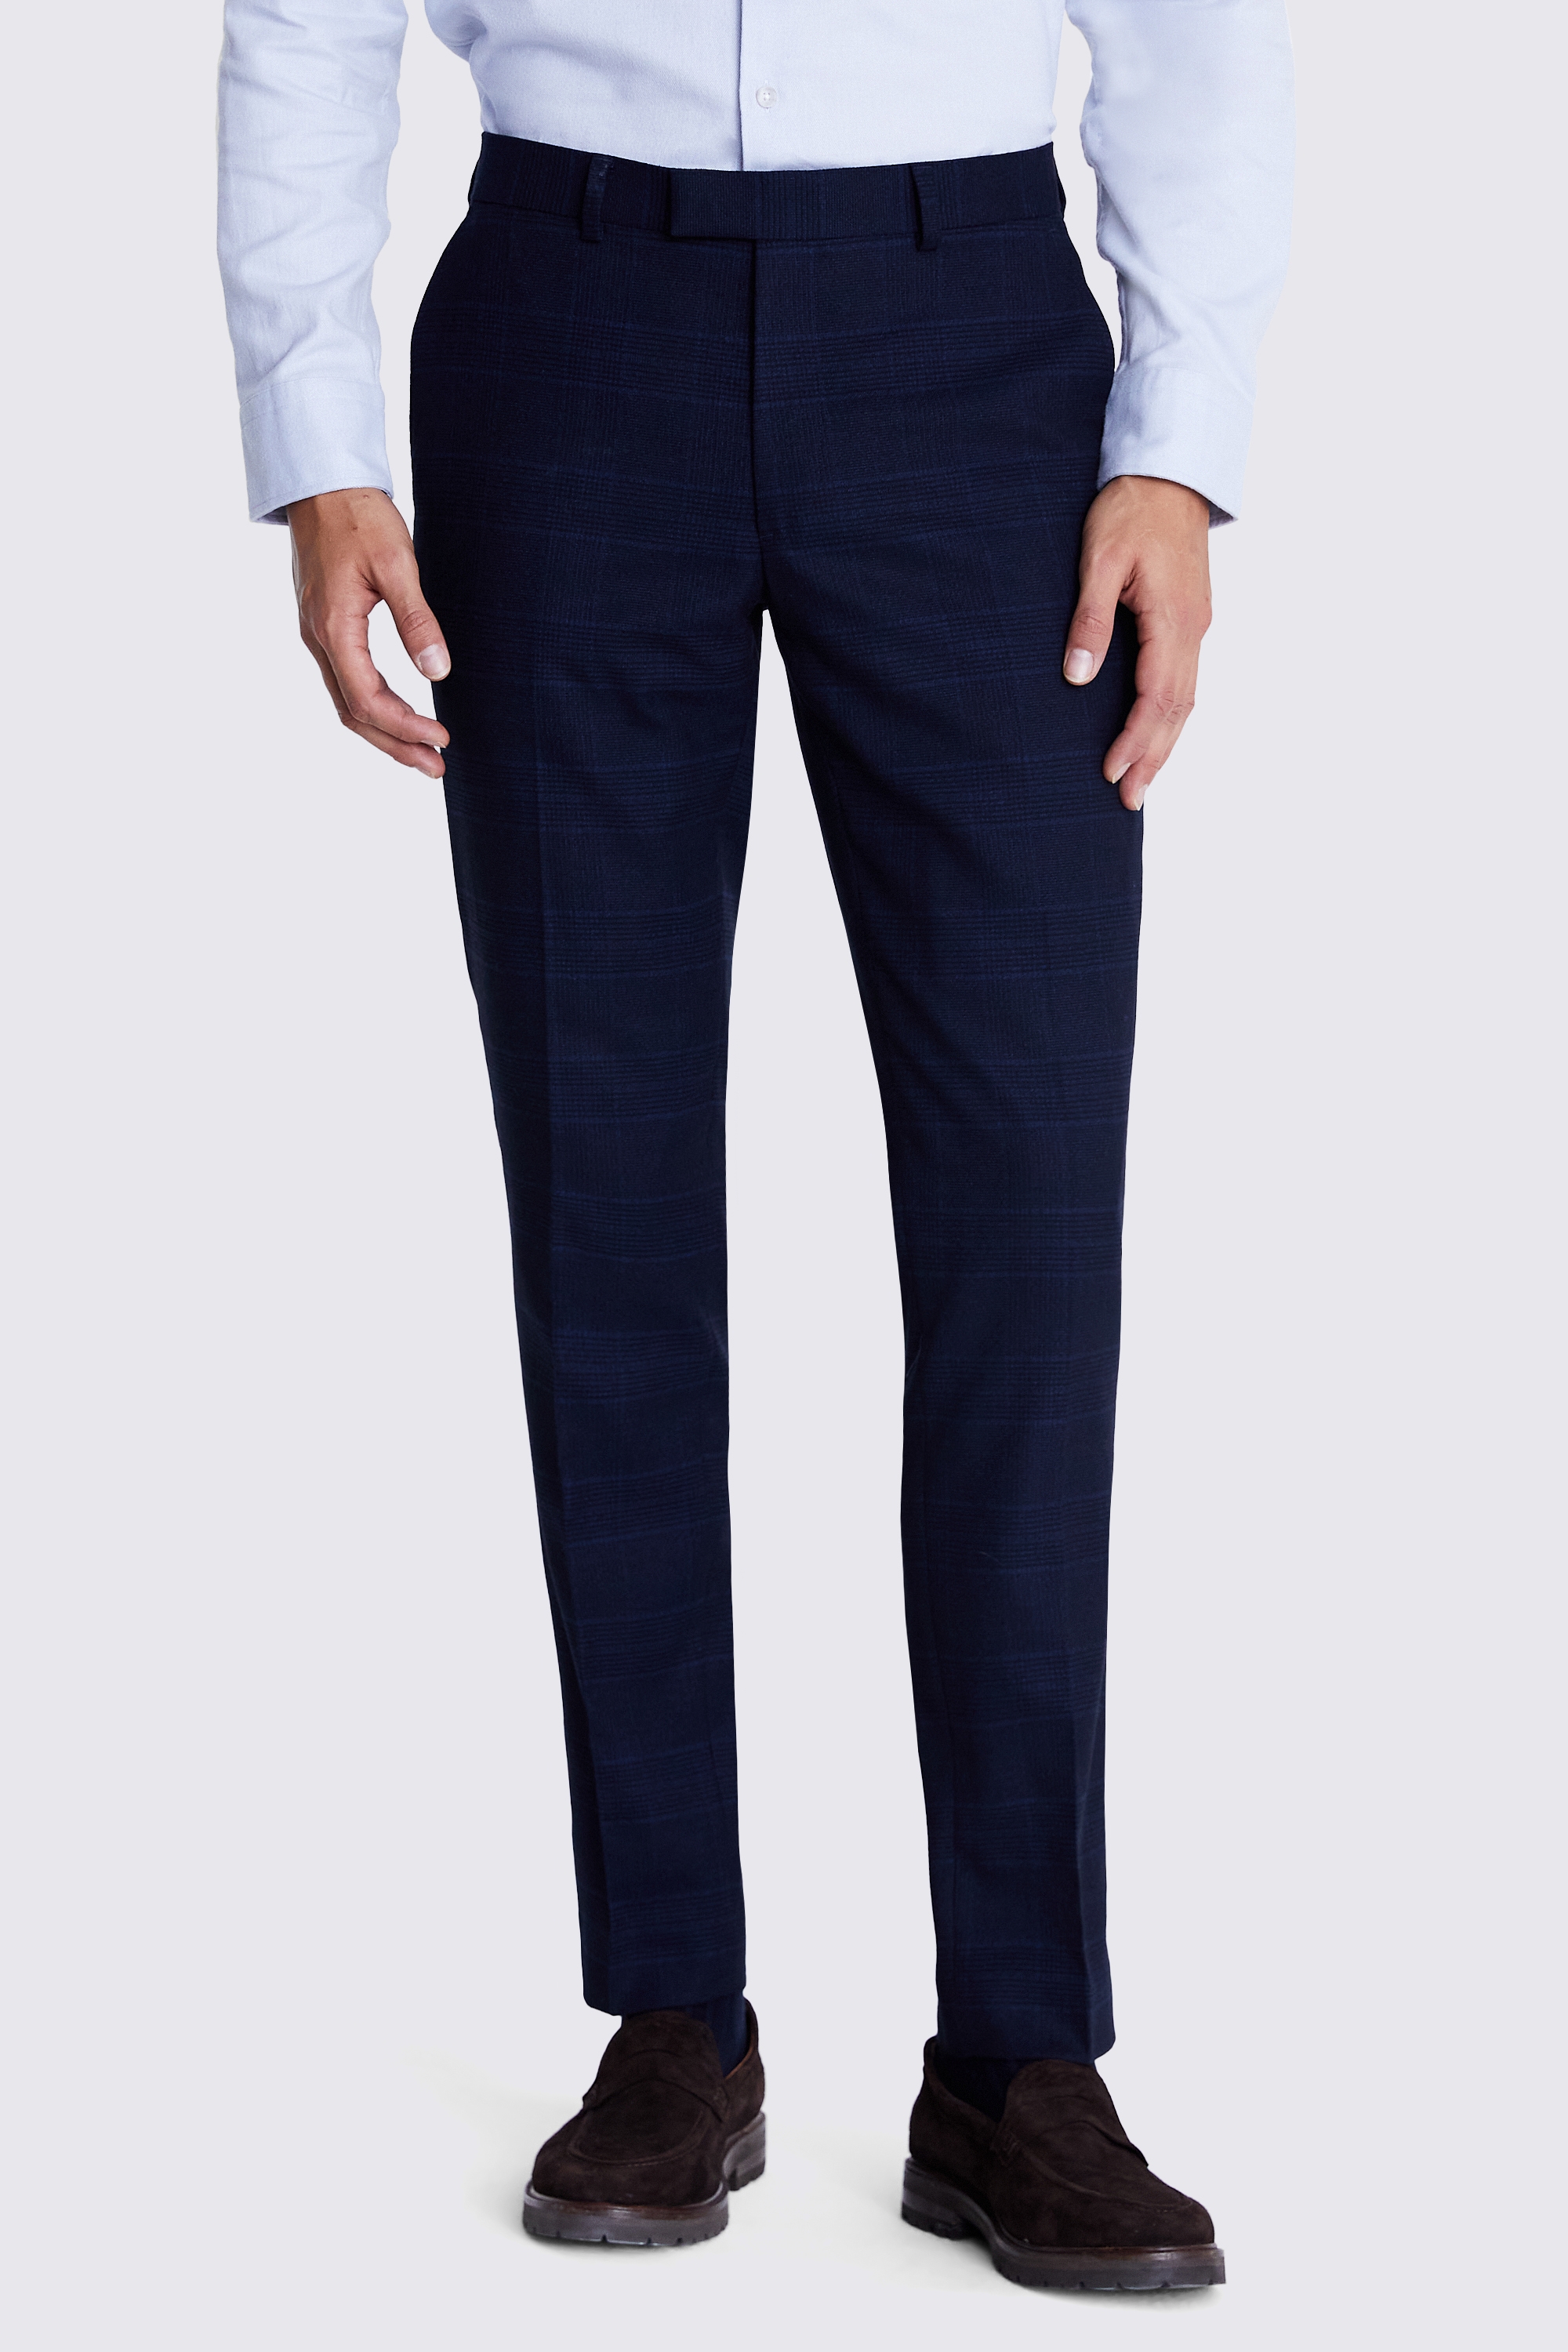 Slim Fit Ink Check Trousers | Buy Online at Moss